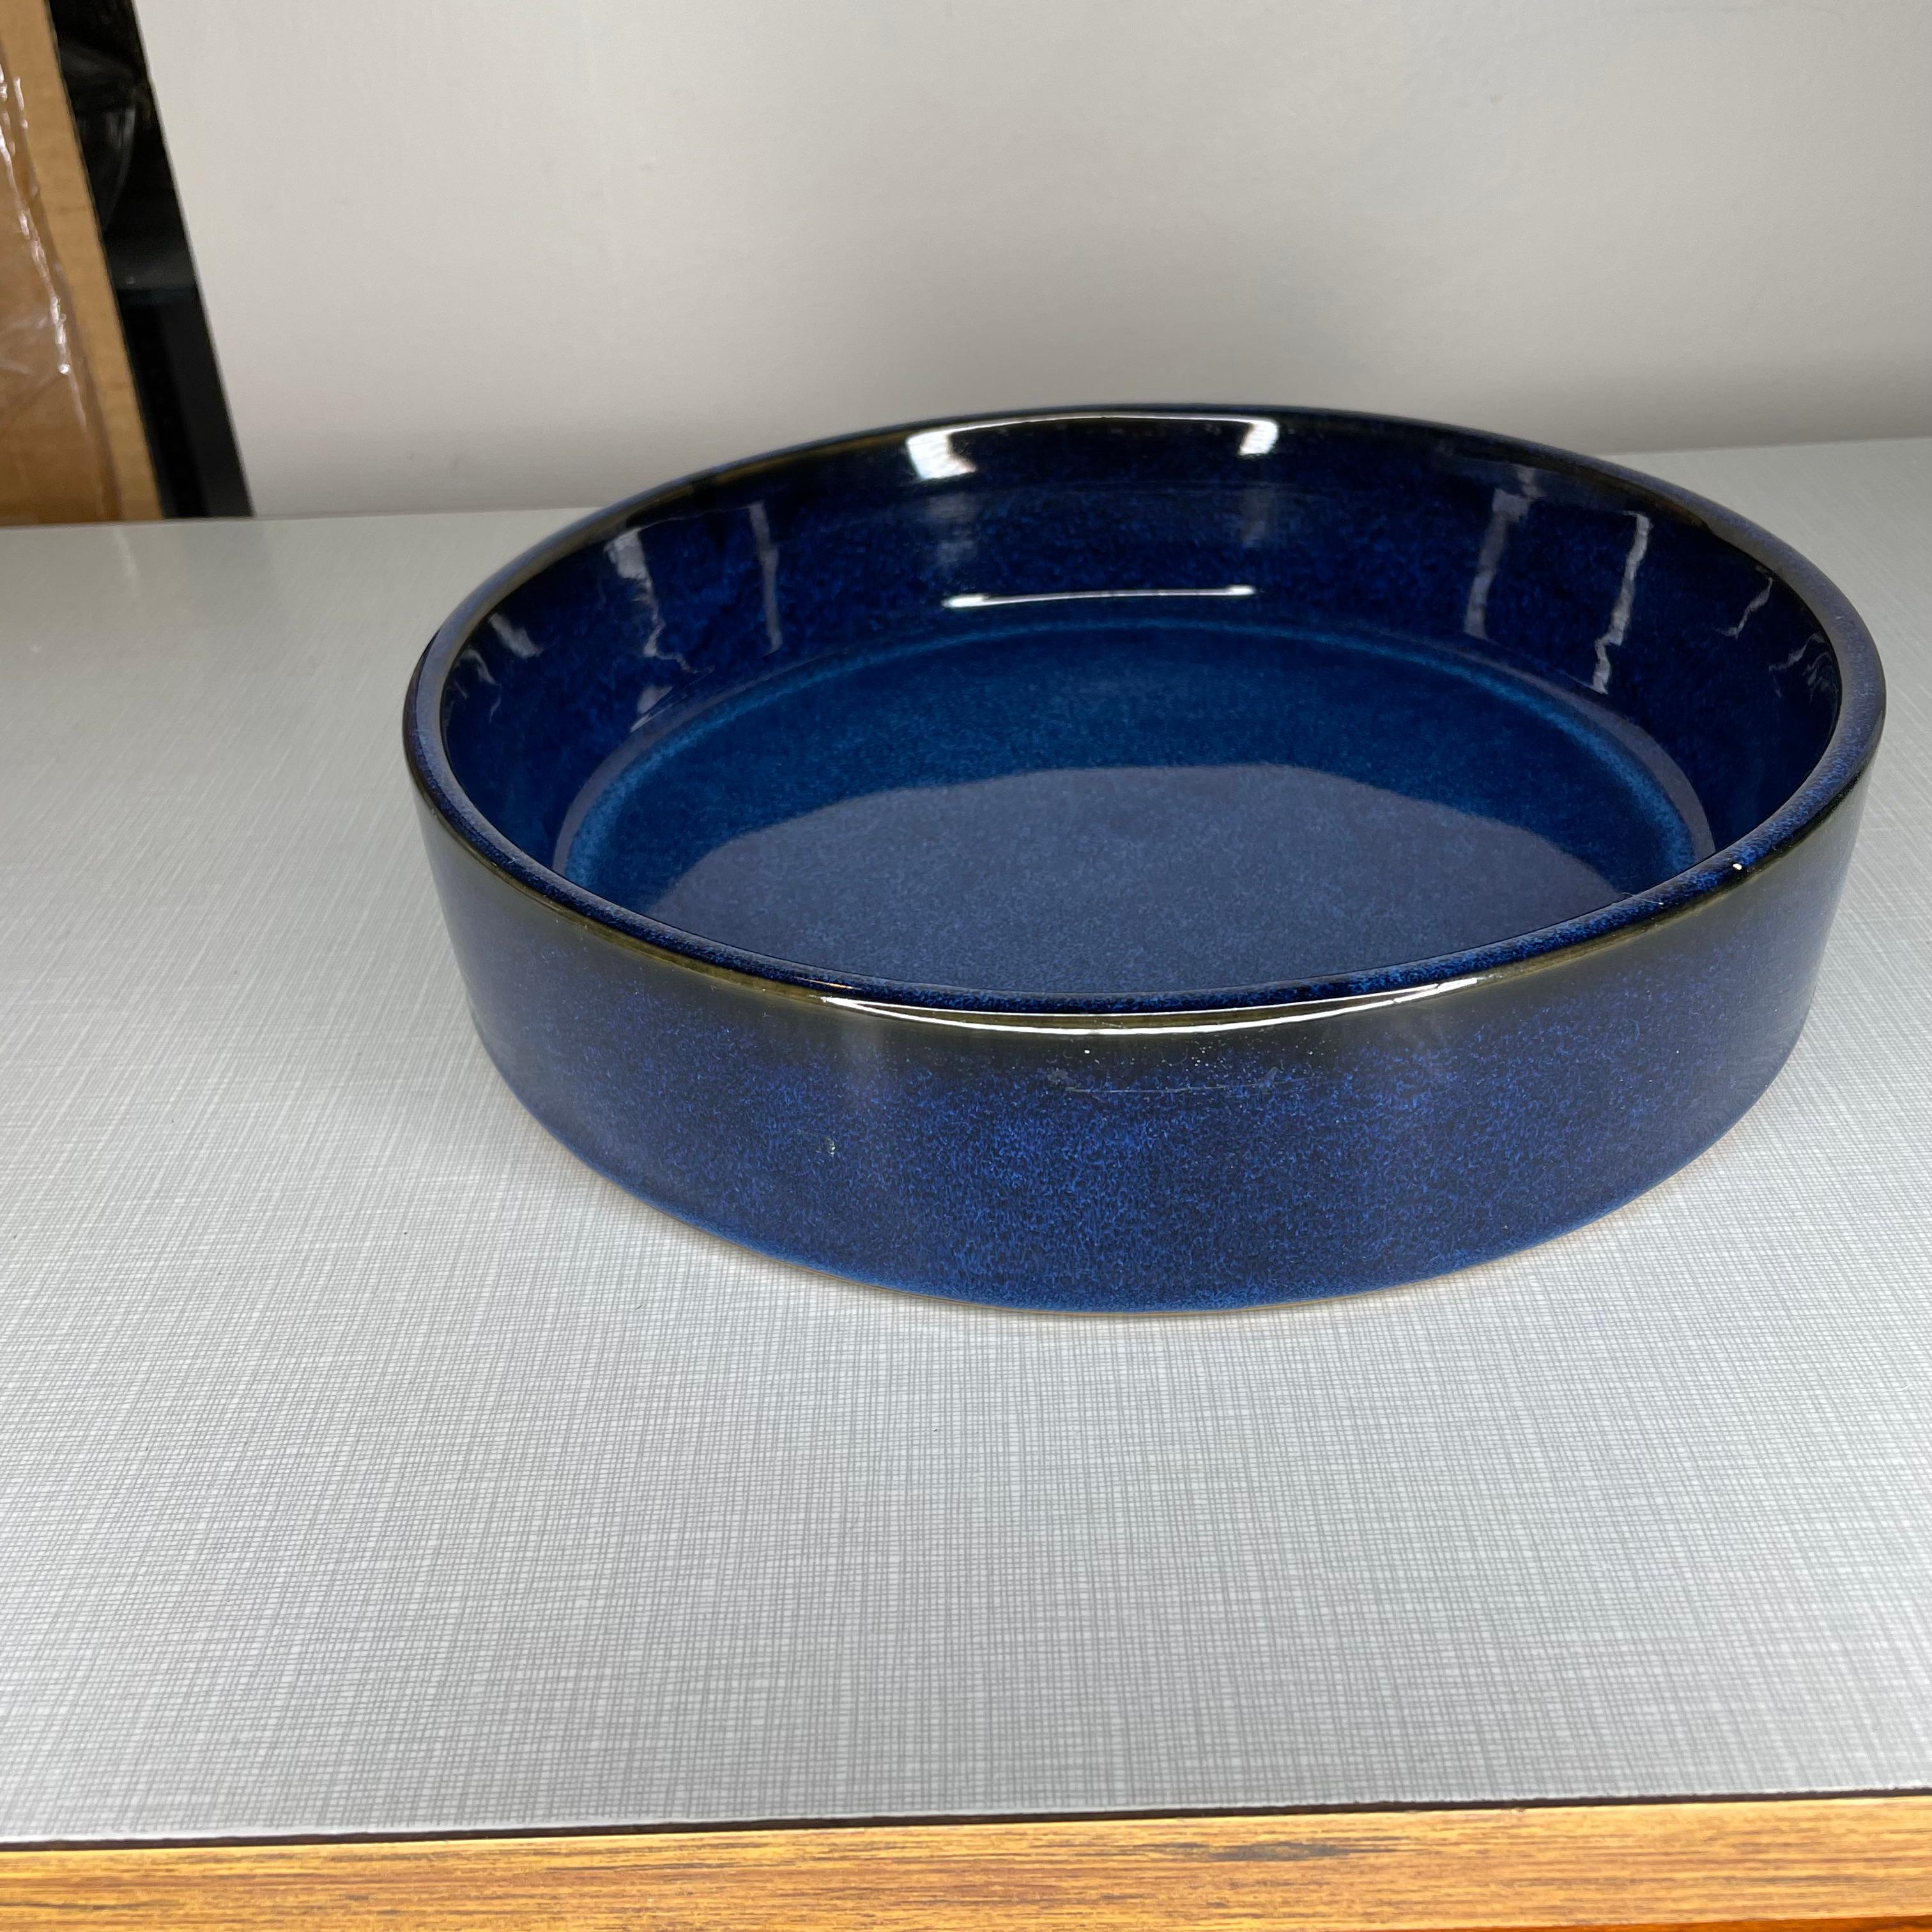 Vintage blue with white speckling bonsai planter in excellent shape. No chips or cracks. Minor crazing from the firing process. Purchased in Japan in the early 1960s. Likely an older pot than from the 1960s but, the precise date cannot be confirmed.